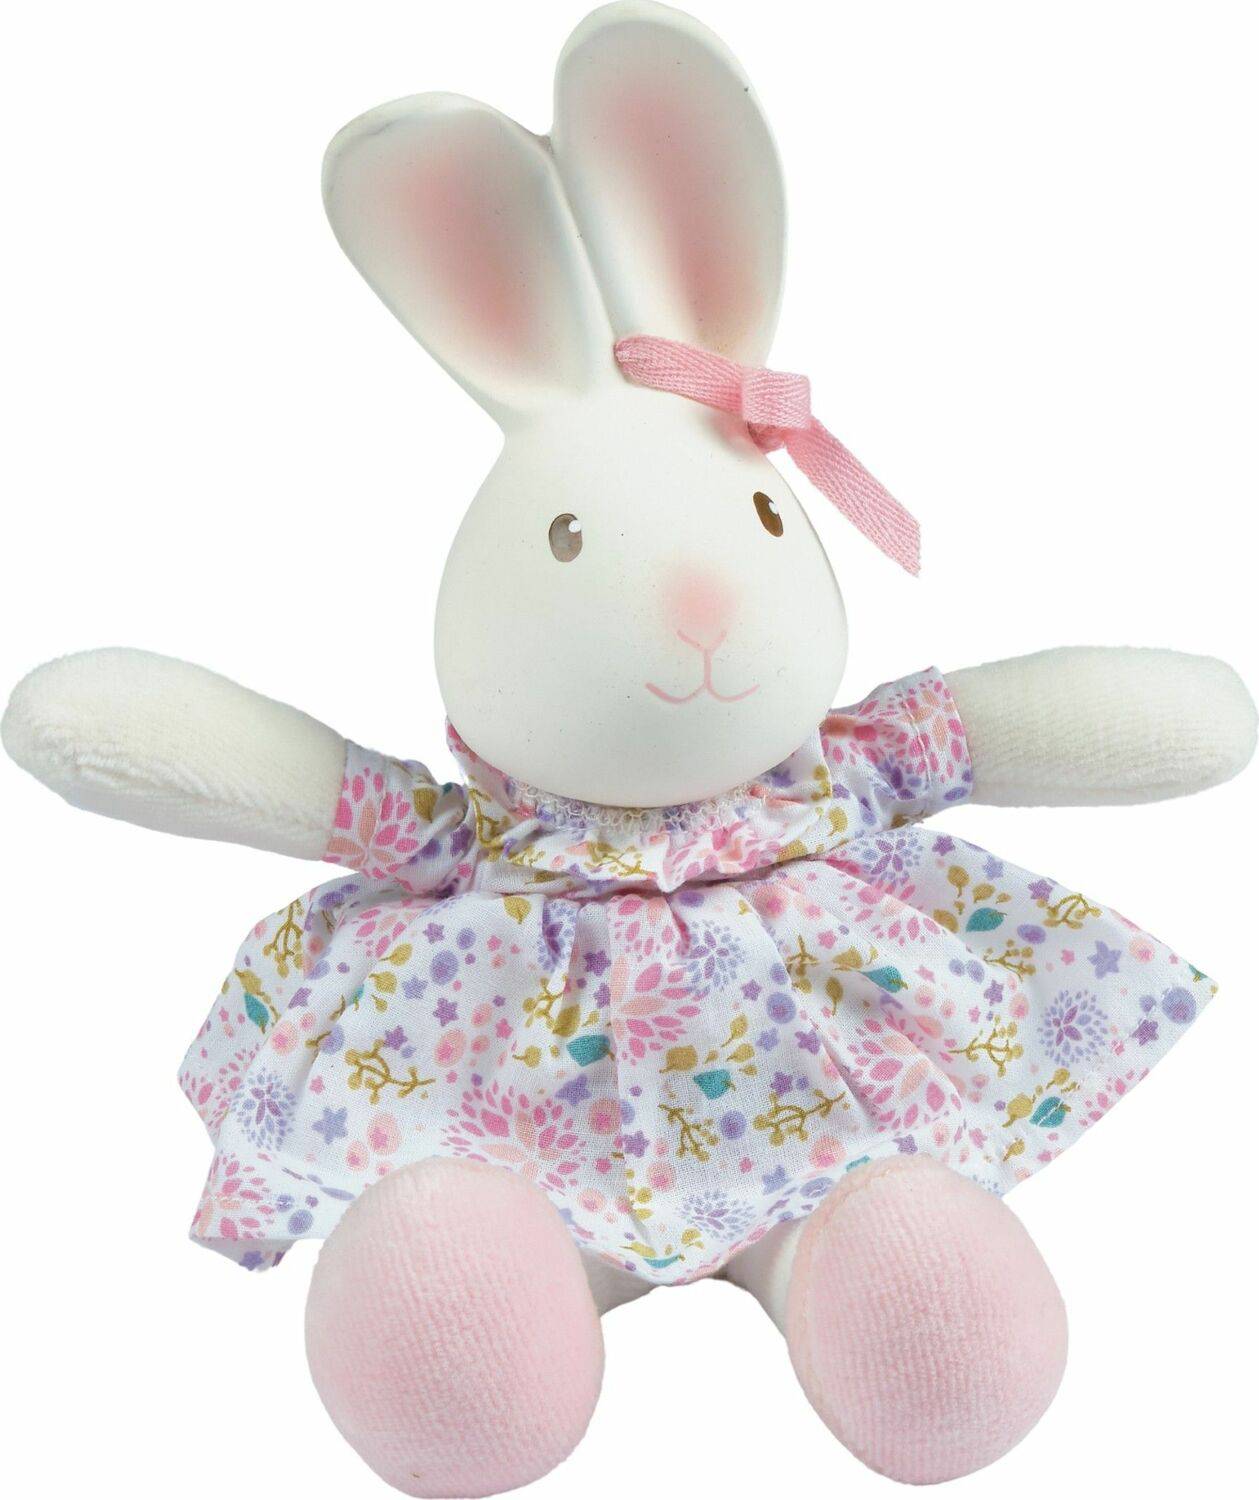 Havah The Bunny - A Child's Delight